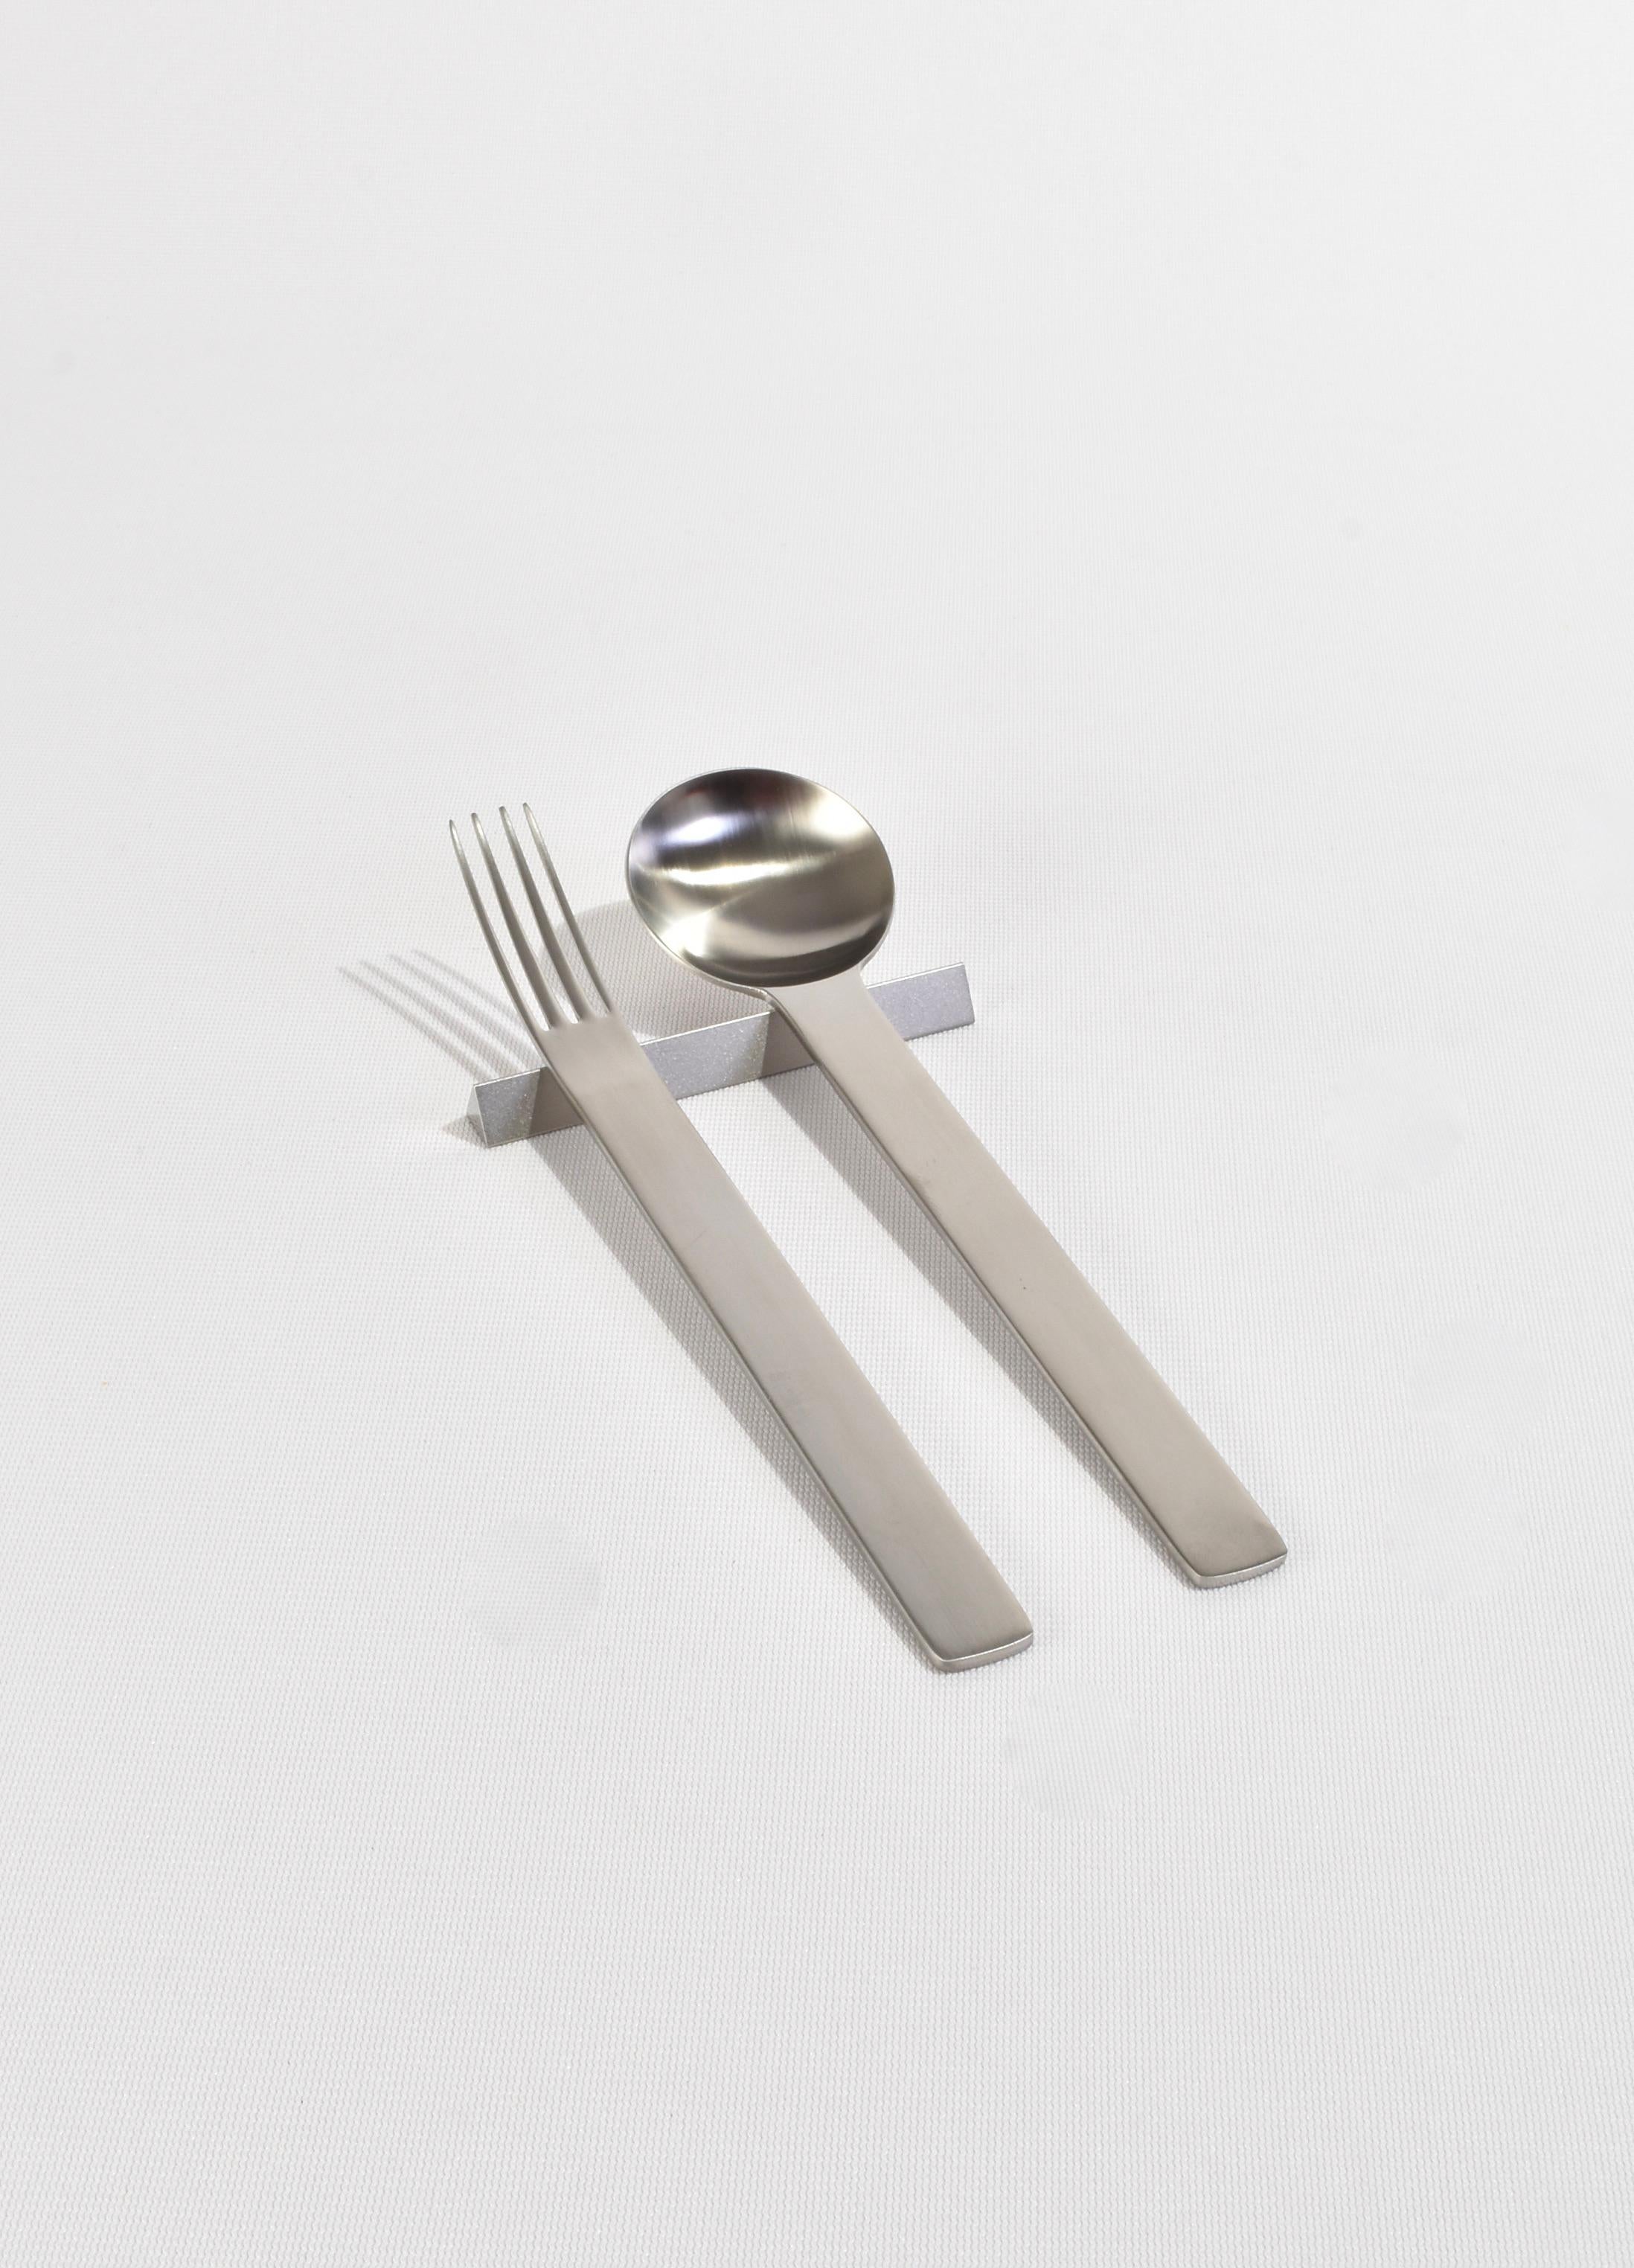 Stainless Steel Cutlery Rest Set